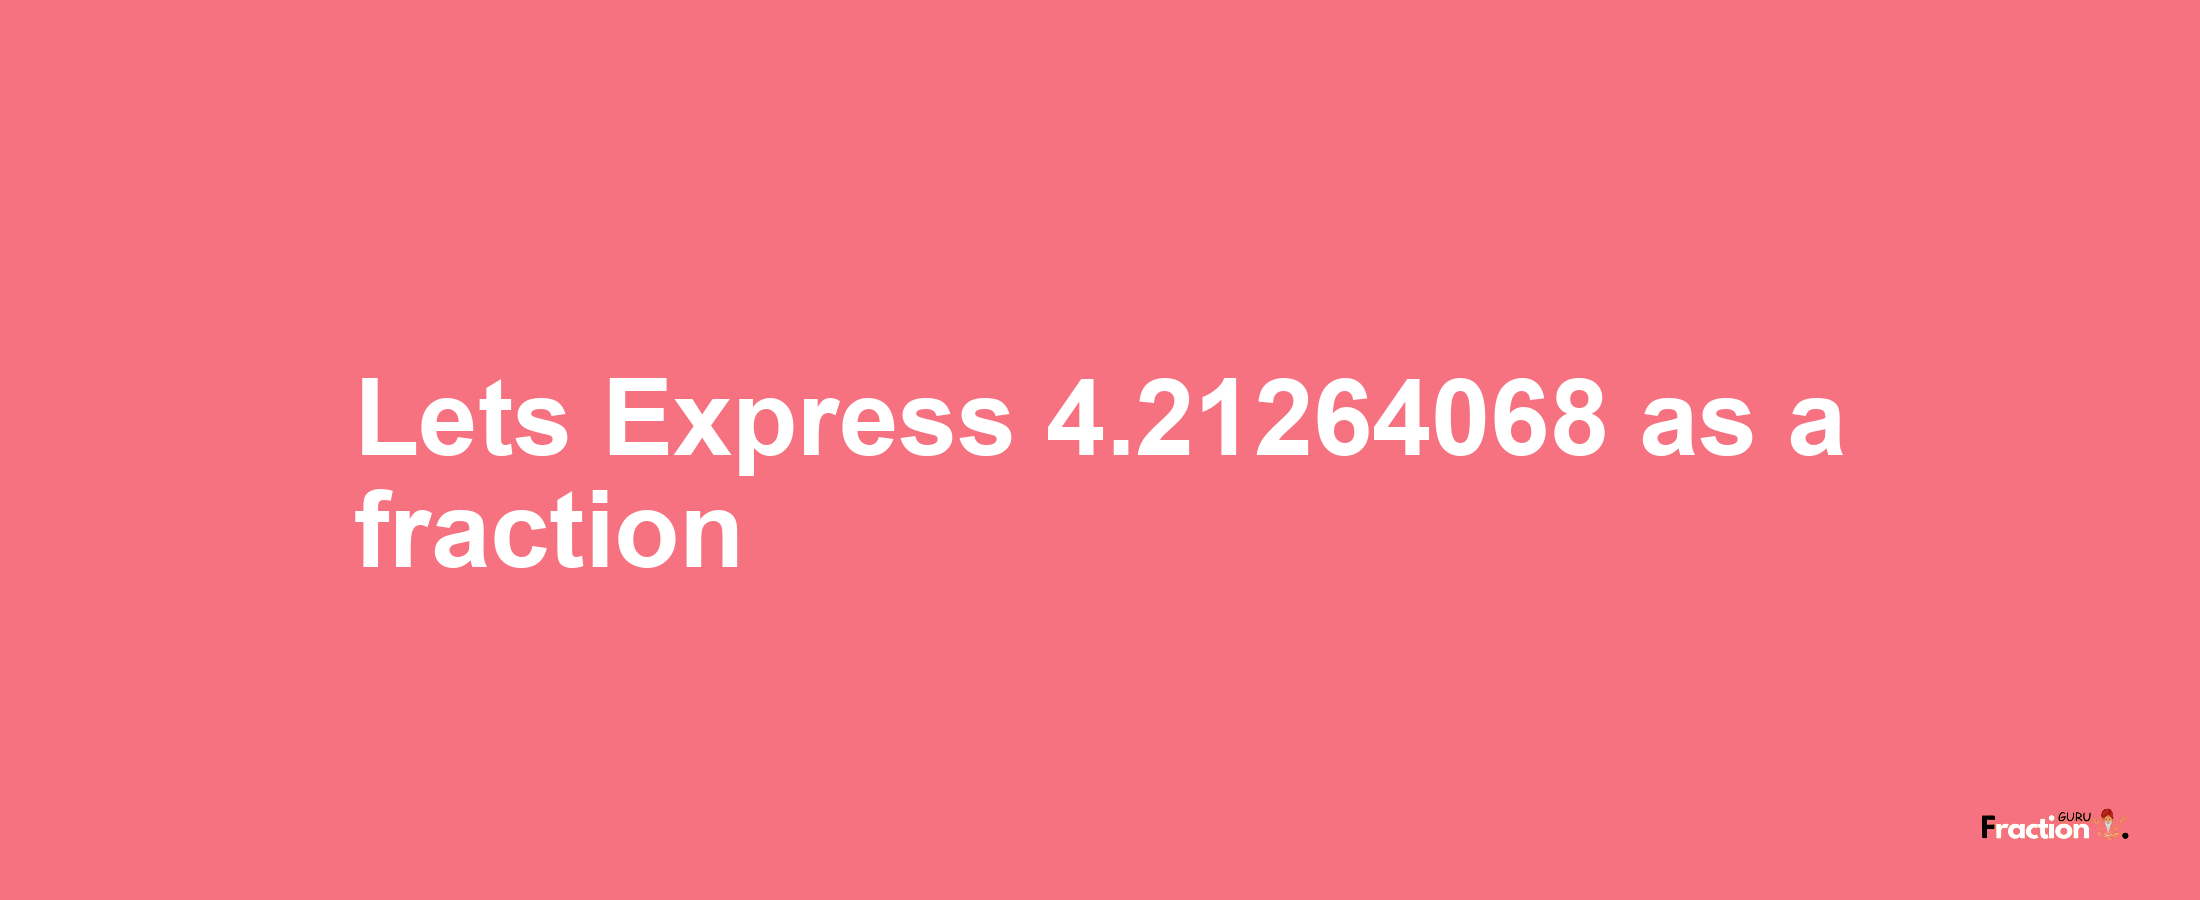 Lets Express 4.21264068 as afraction